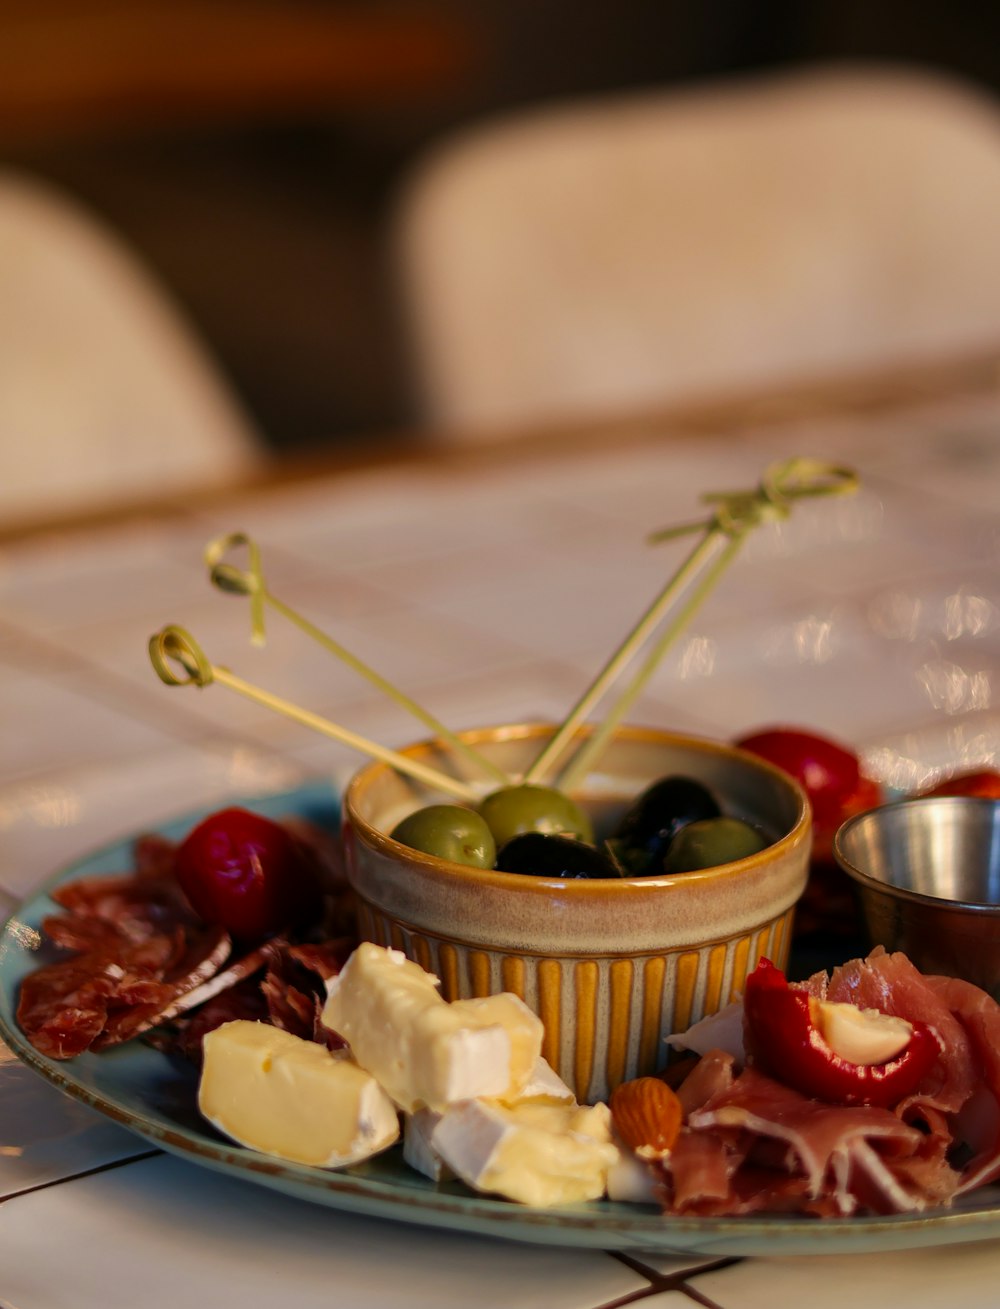 a plate of food with olives, cheese, and meat